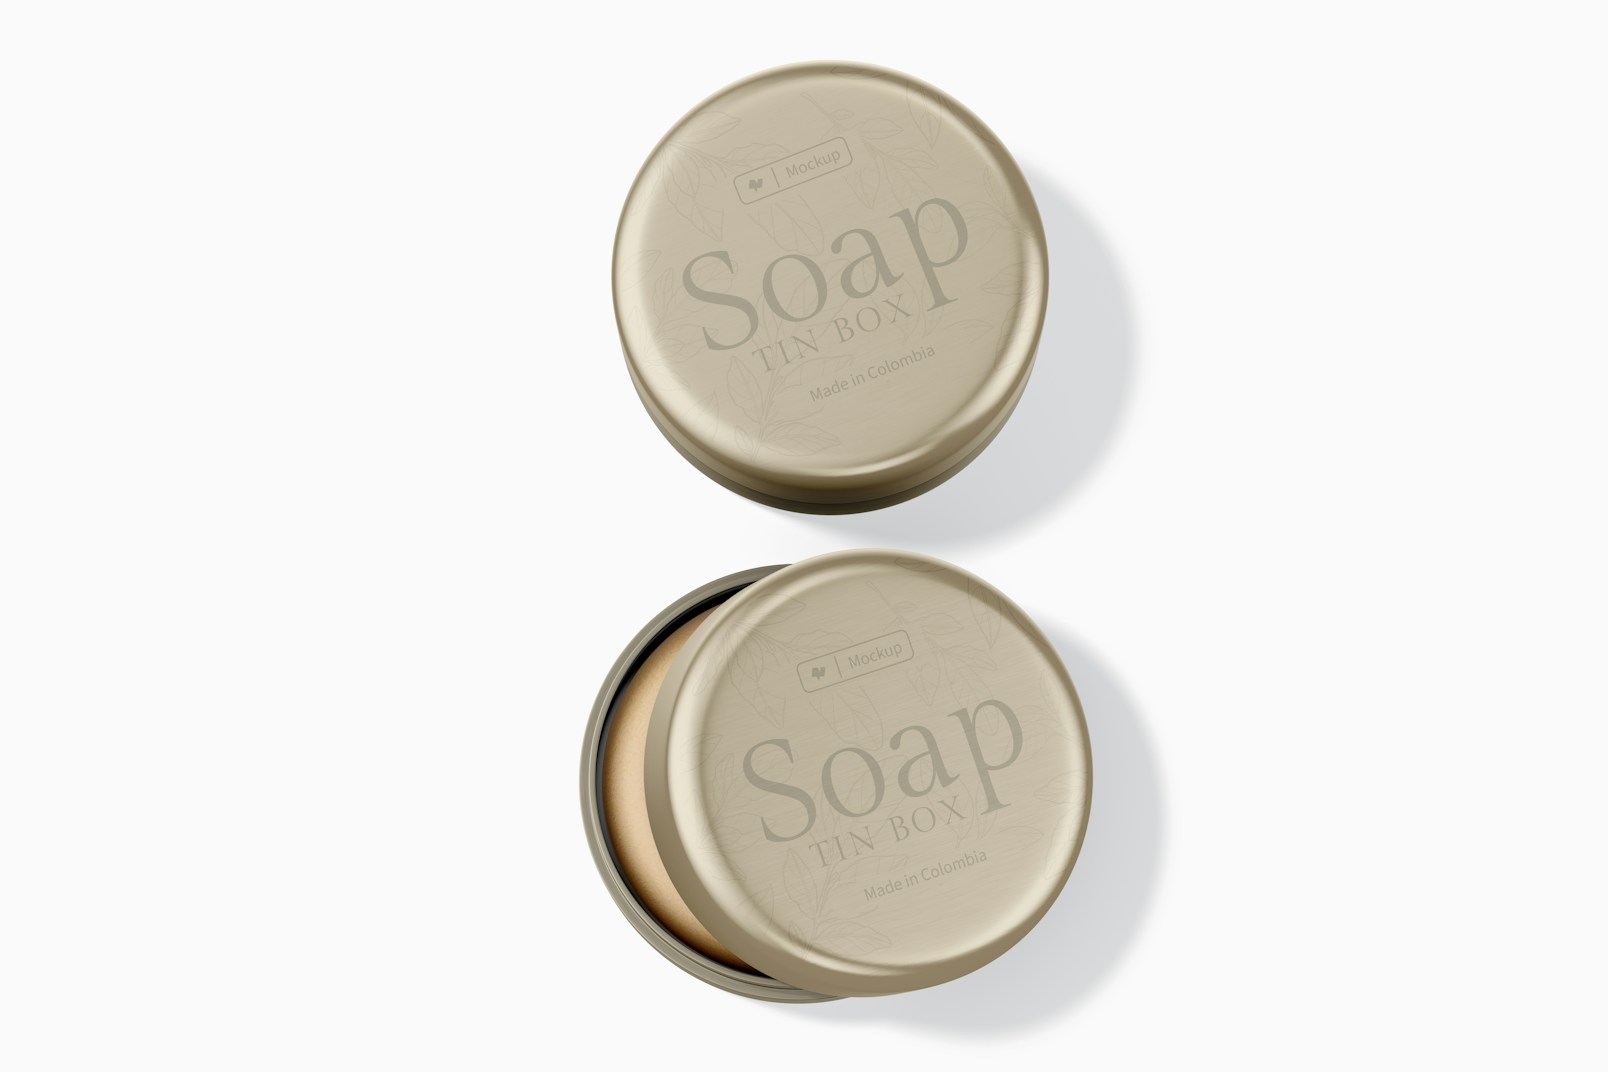 Round Soap Tin Boxes Mockup, Top View